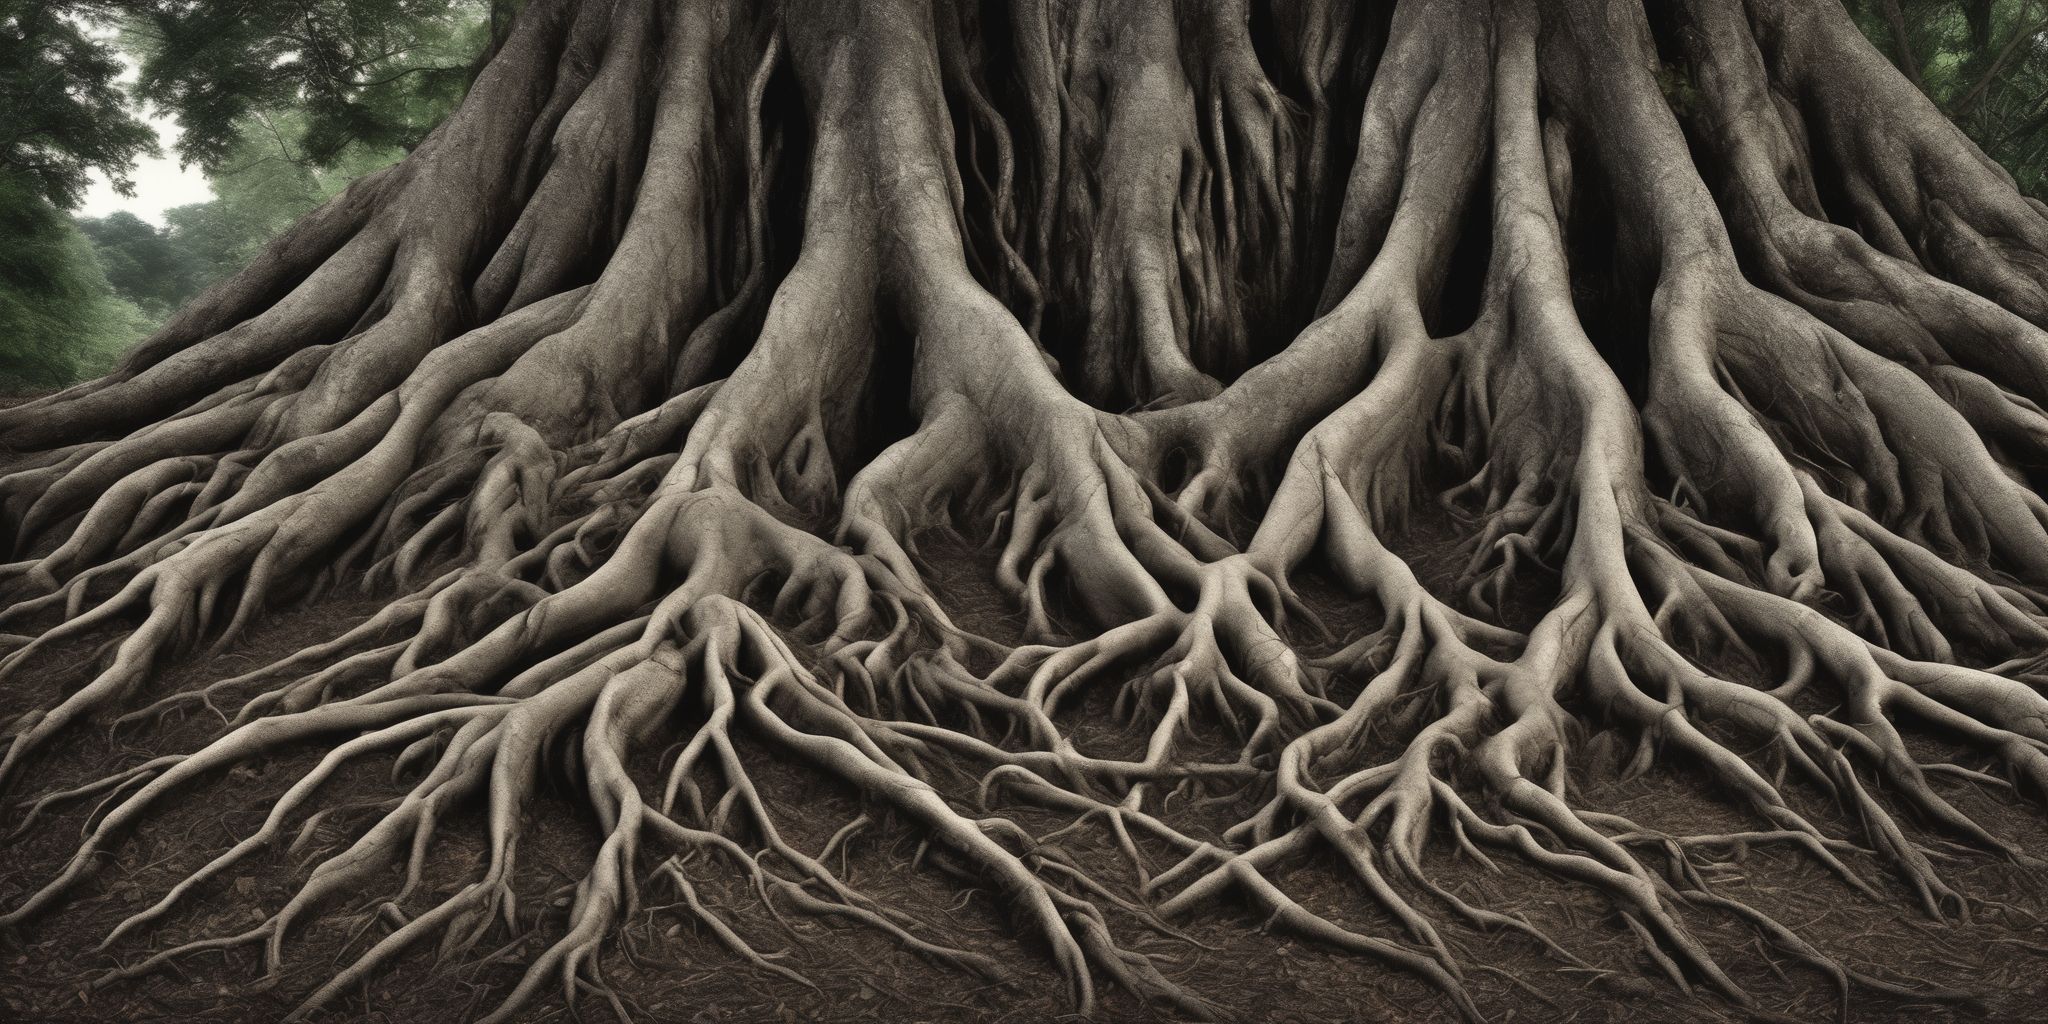 Roots  in realistic, photographic style